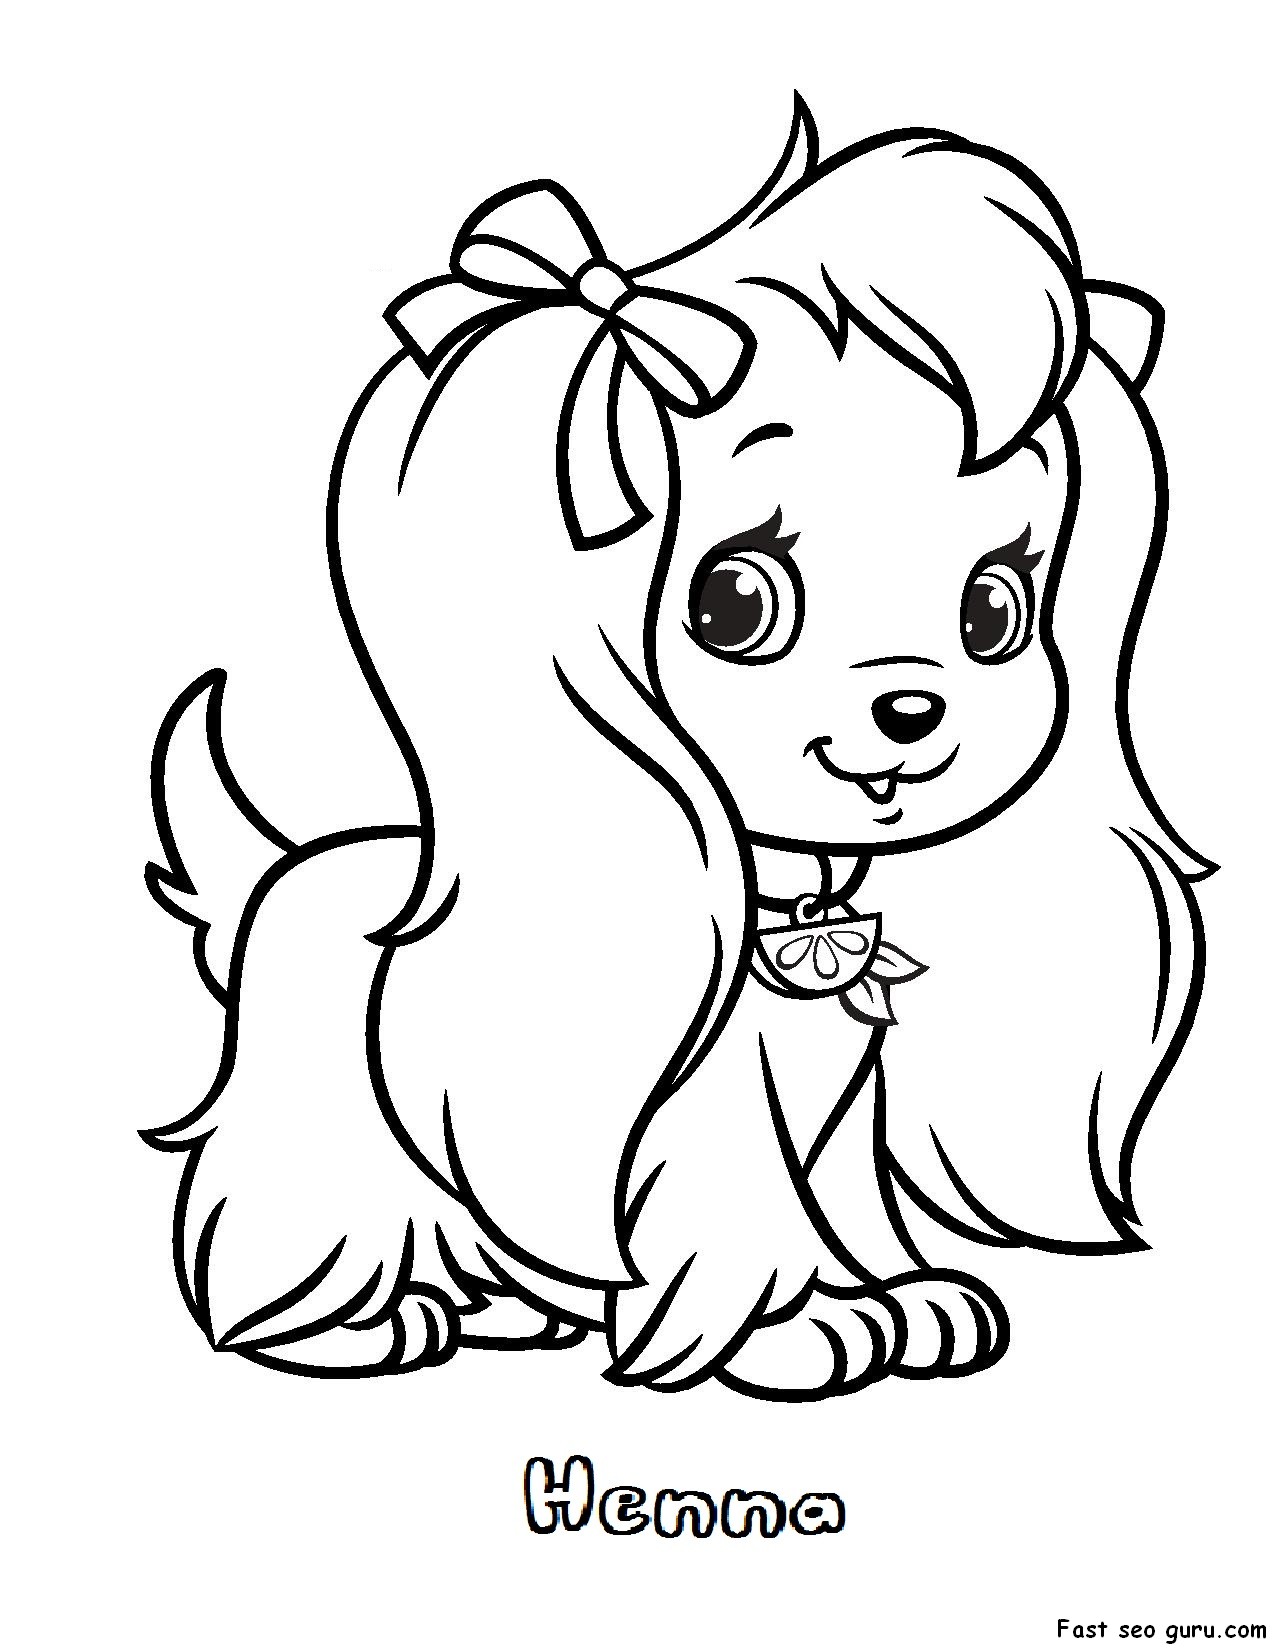 Printable Henna Strawberry Shortcake coloring pages